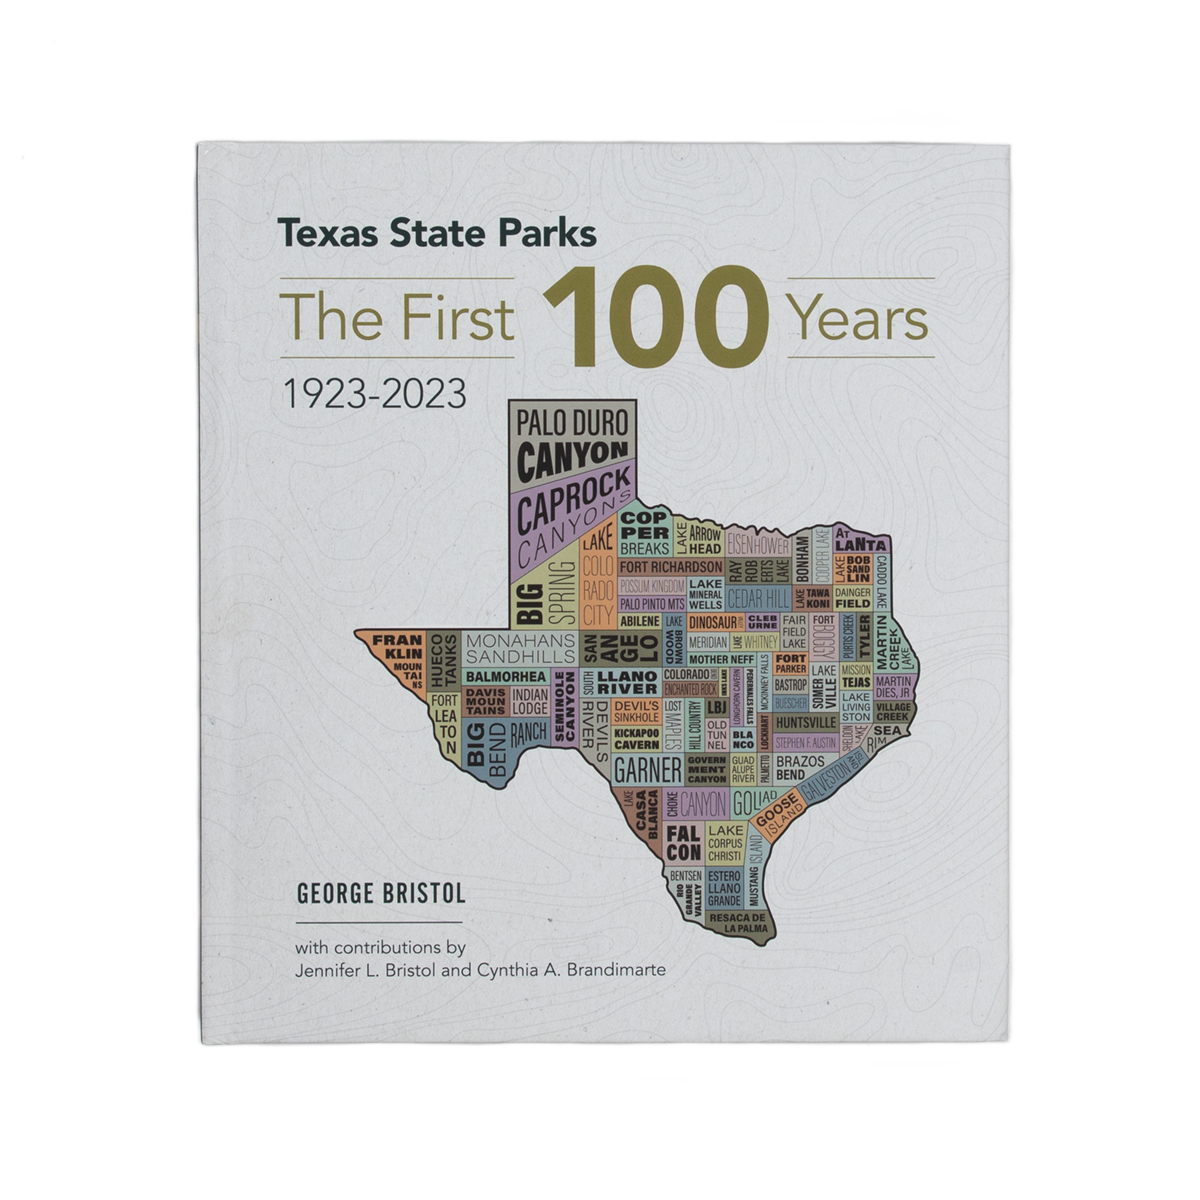 Texas State Parks The First One Hundred Years